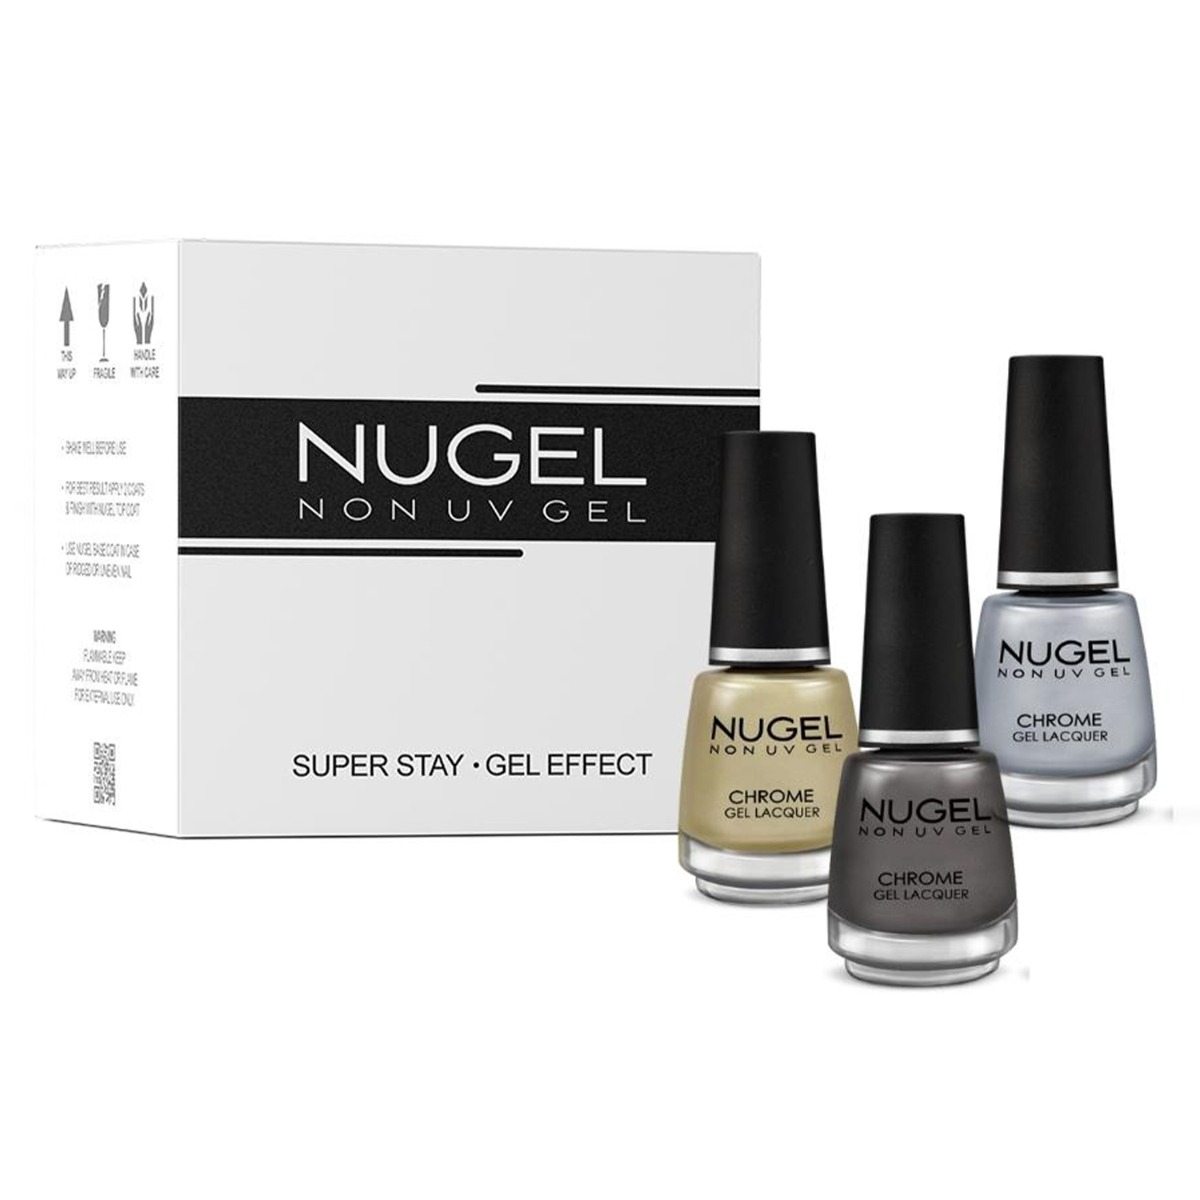 NUGEL 3 In 1 Combo 14 Quick Dry Gel Finish Nail Paint - Chrome Collection, Nail Kit, 39ml